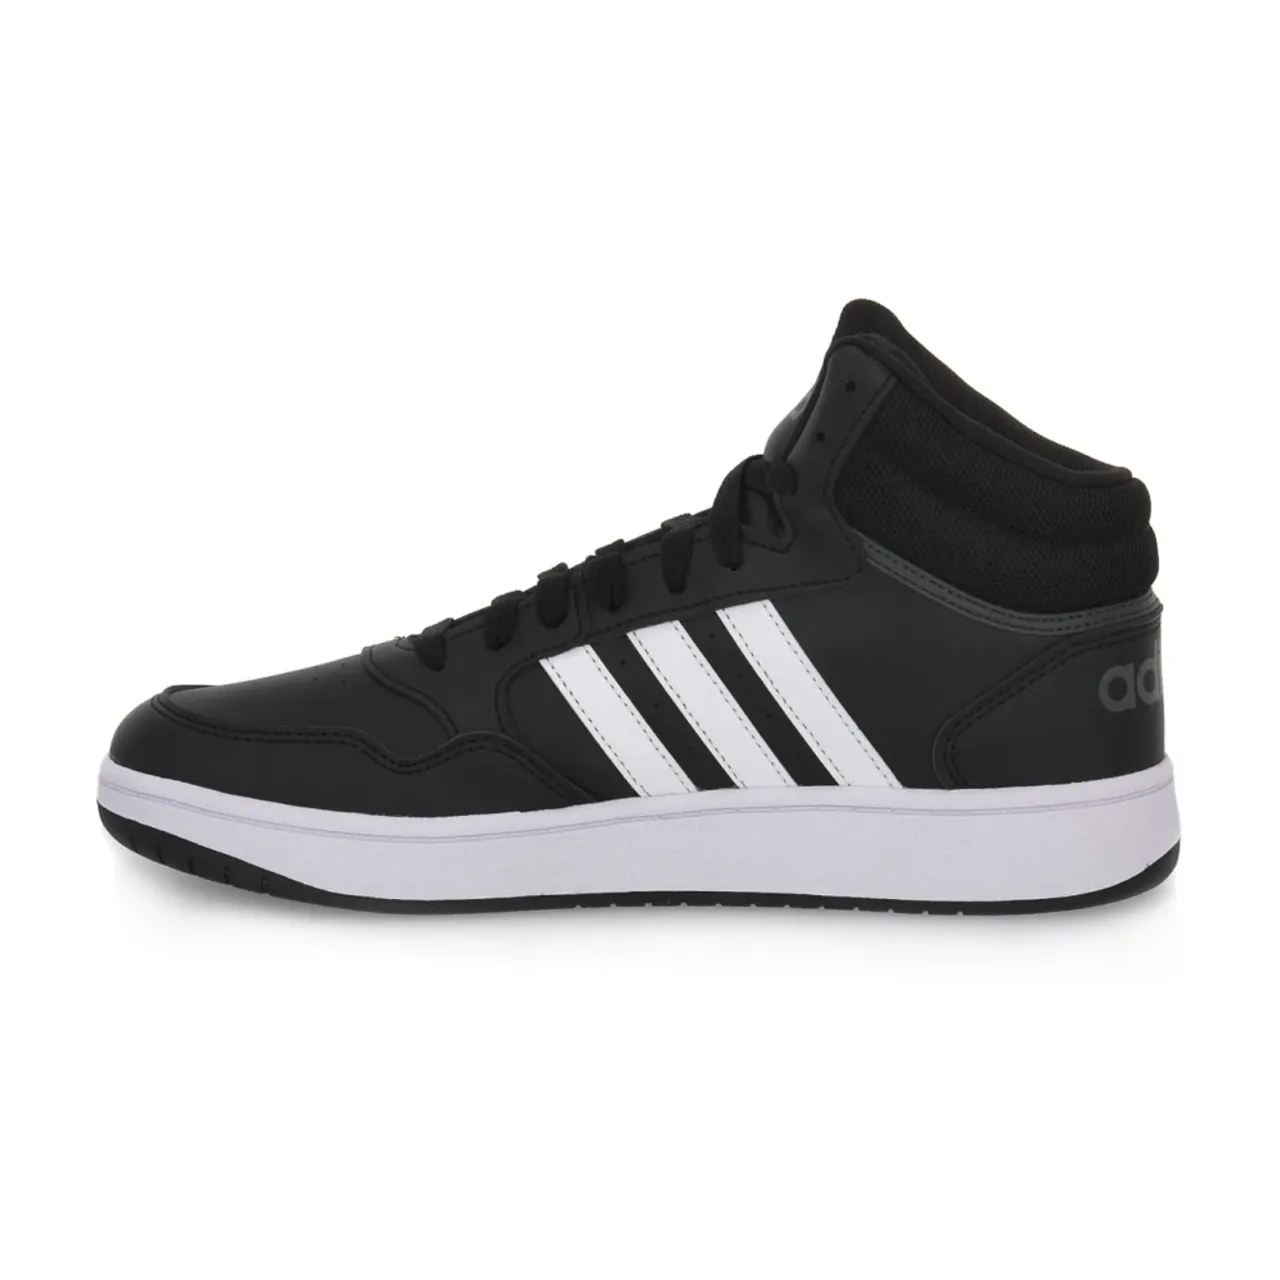 Adidas , Hoops 3 Mid K Basketball Shoes ,White male, Sizes: